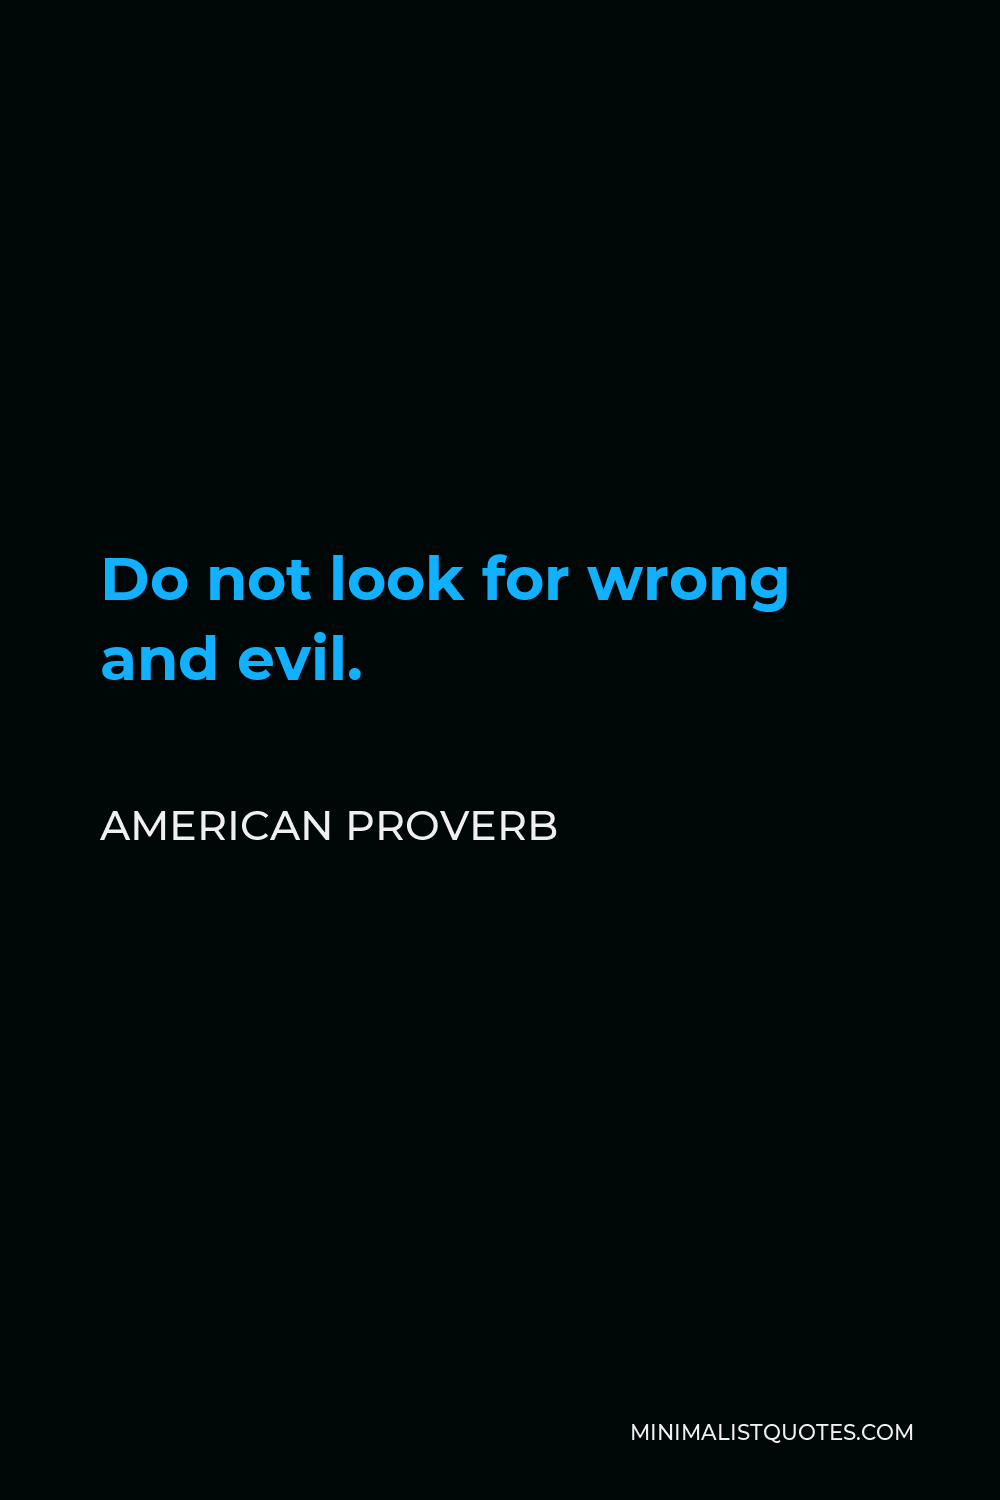 American Proverb Quote - Do not look for wrong and evil.